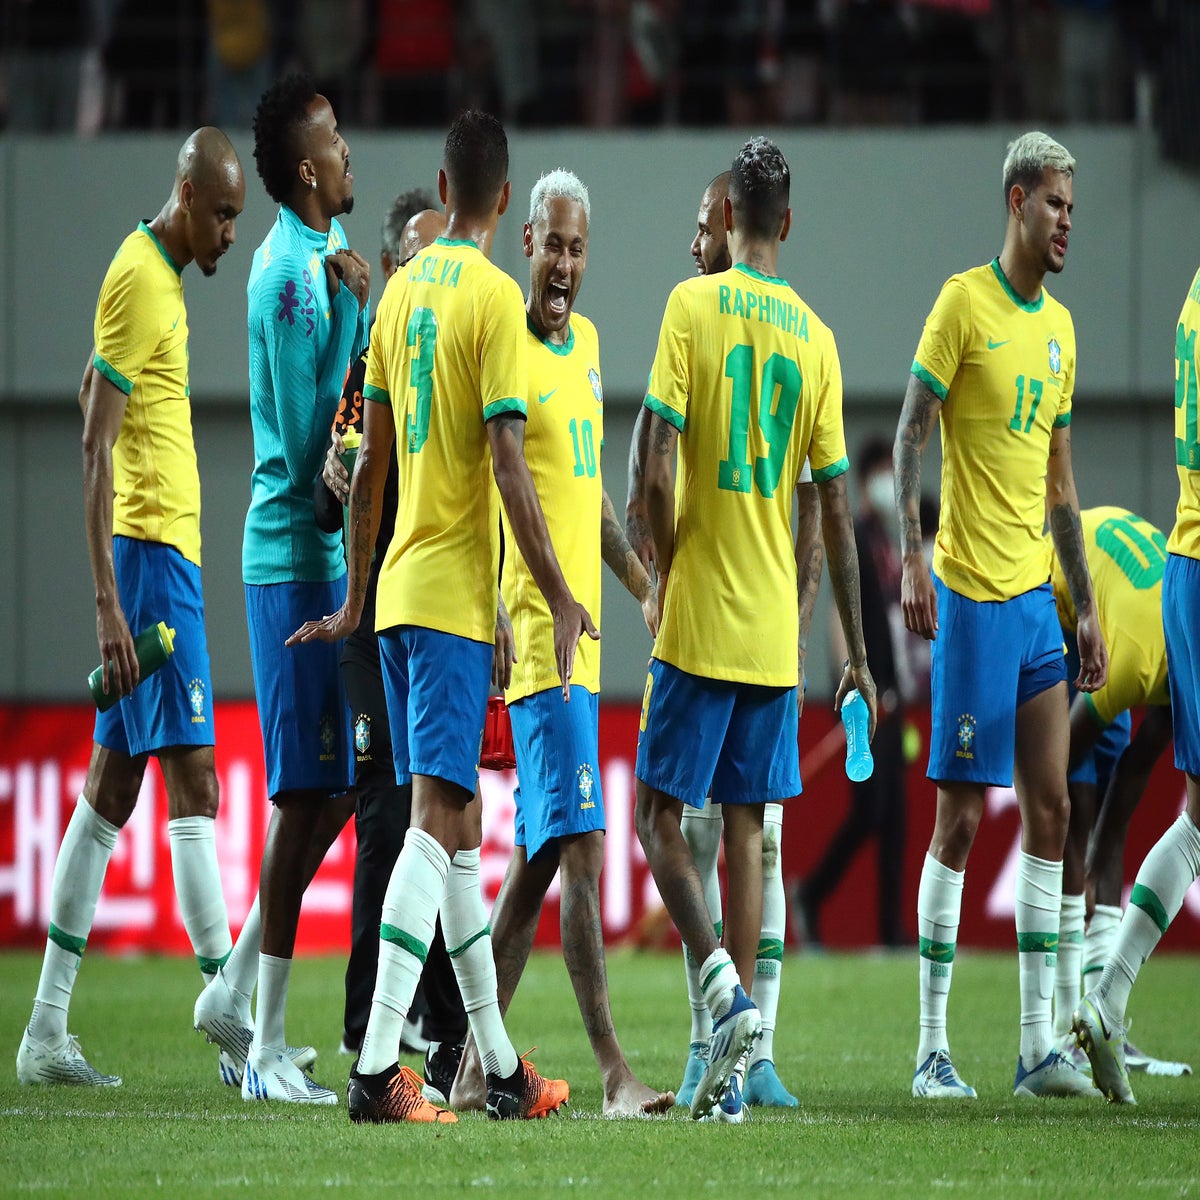 Brazil vs Switzerland World Cup lineups, starting 11 for Group G match at  Qatar 2022